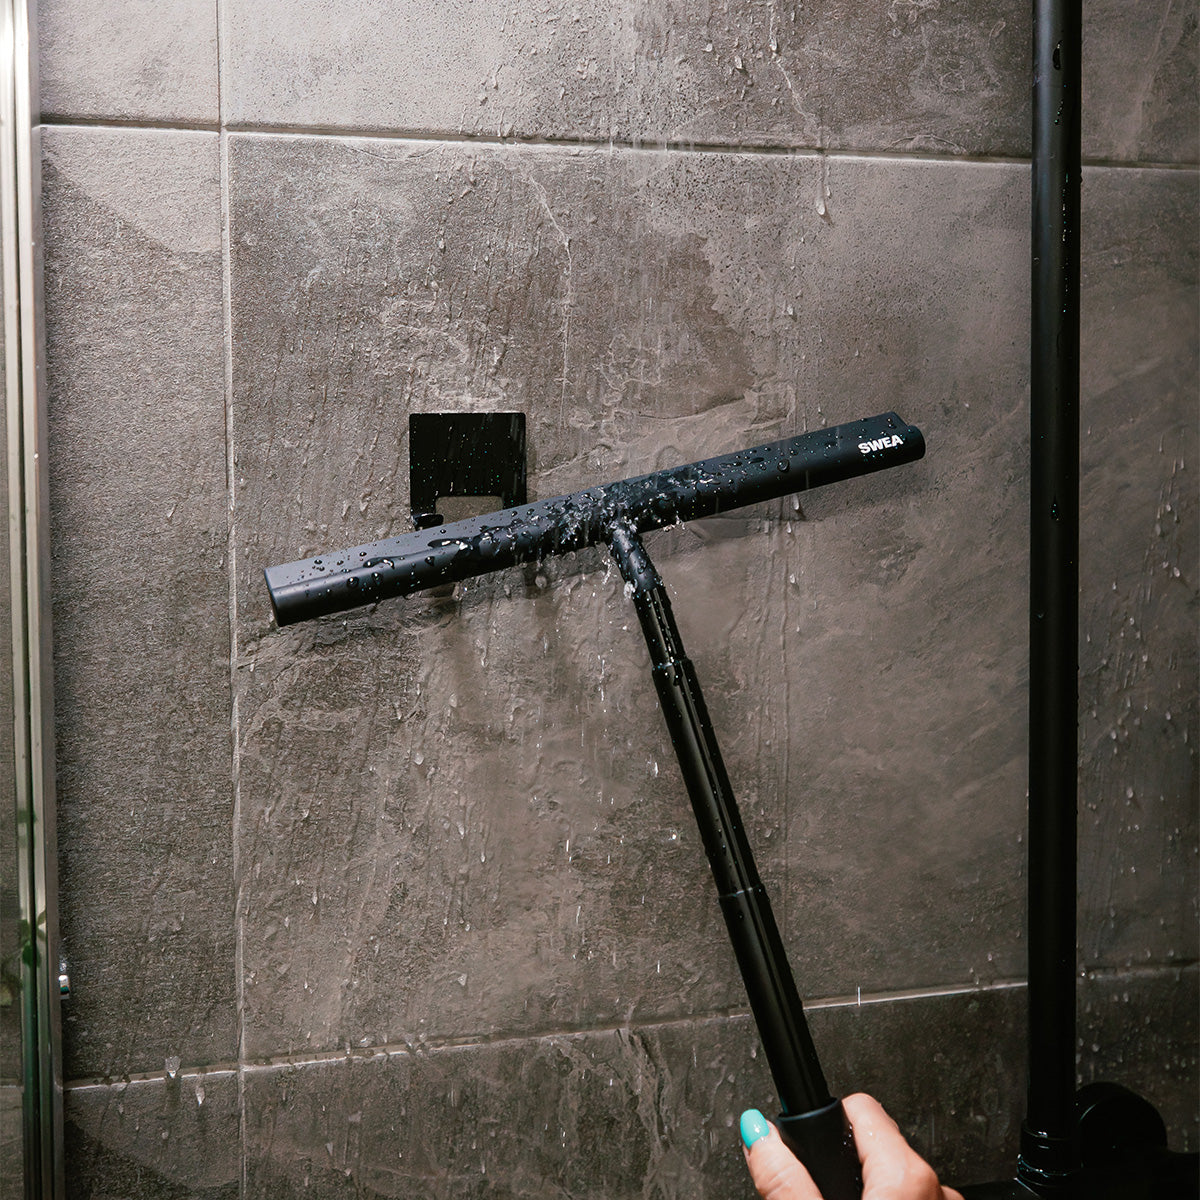 A person using the wet SWEA shower squeegee 